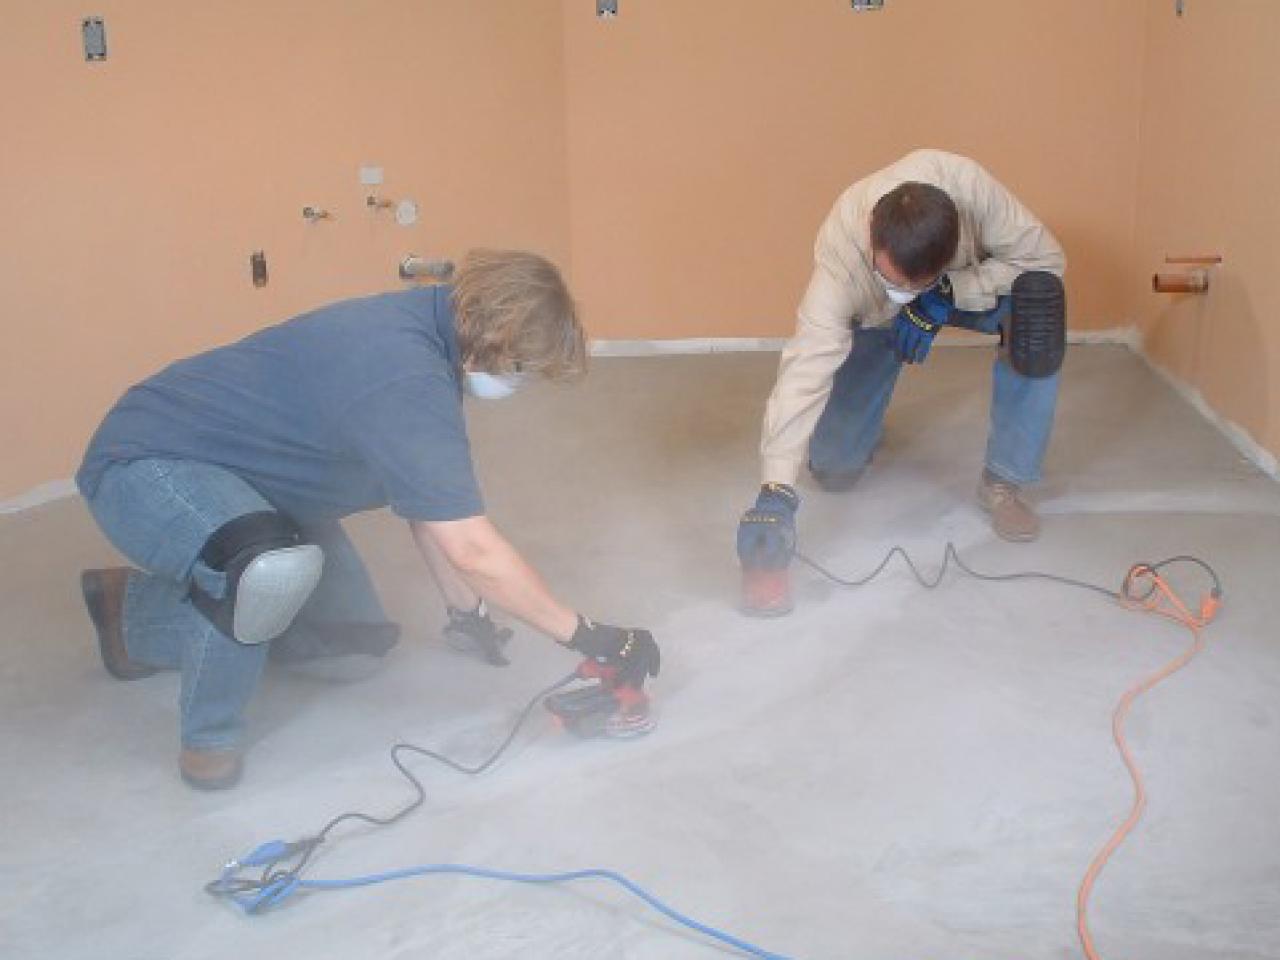 How To Install Vinyl Tile Flooring, How To Lay Vinyl Flooring Squares